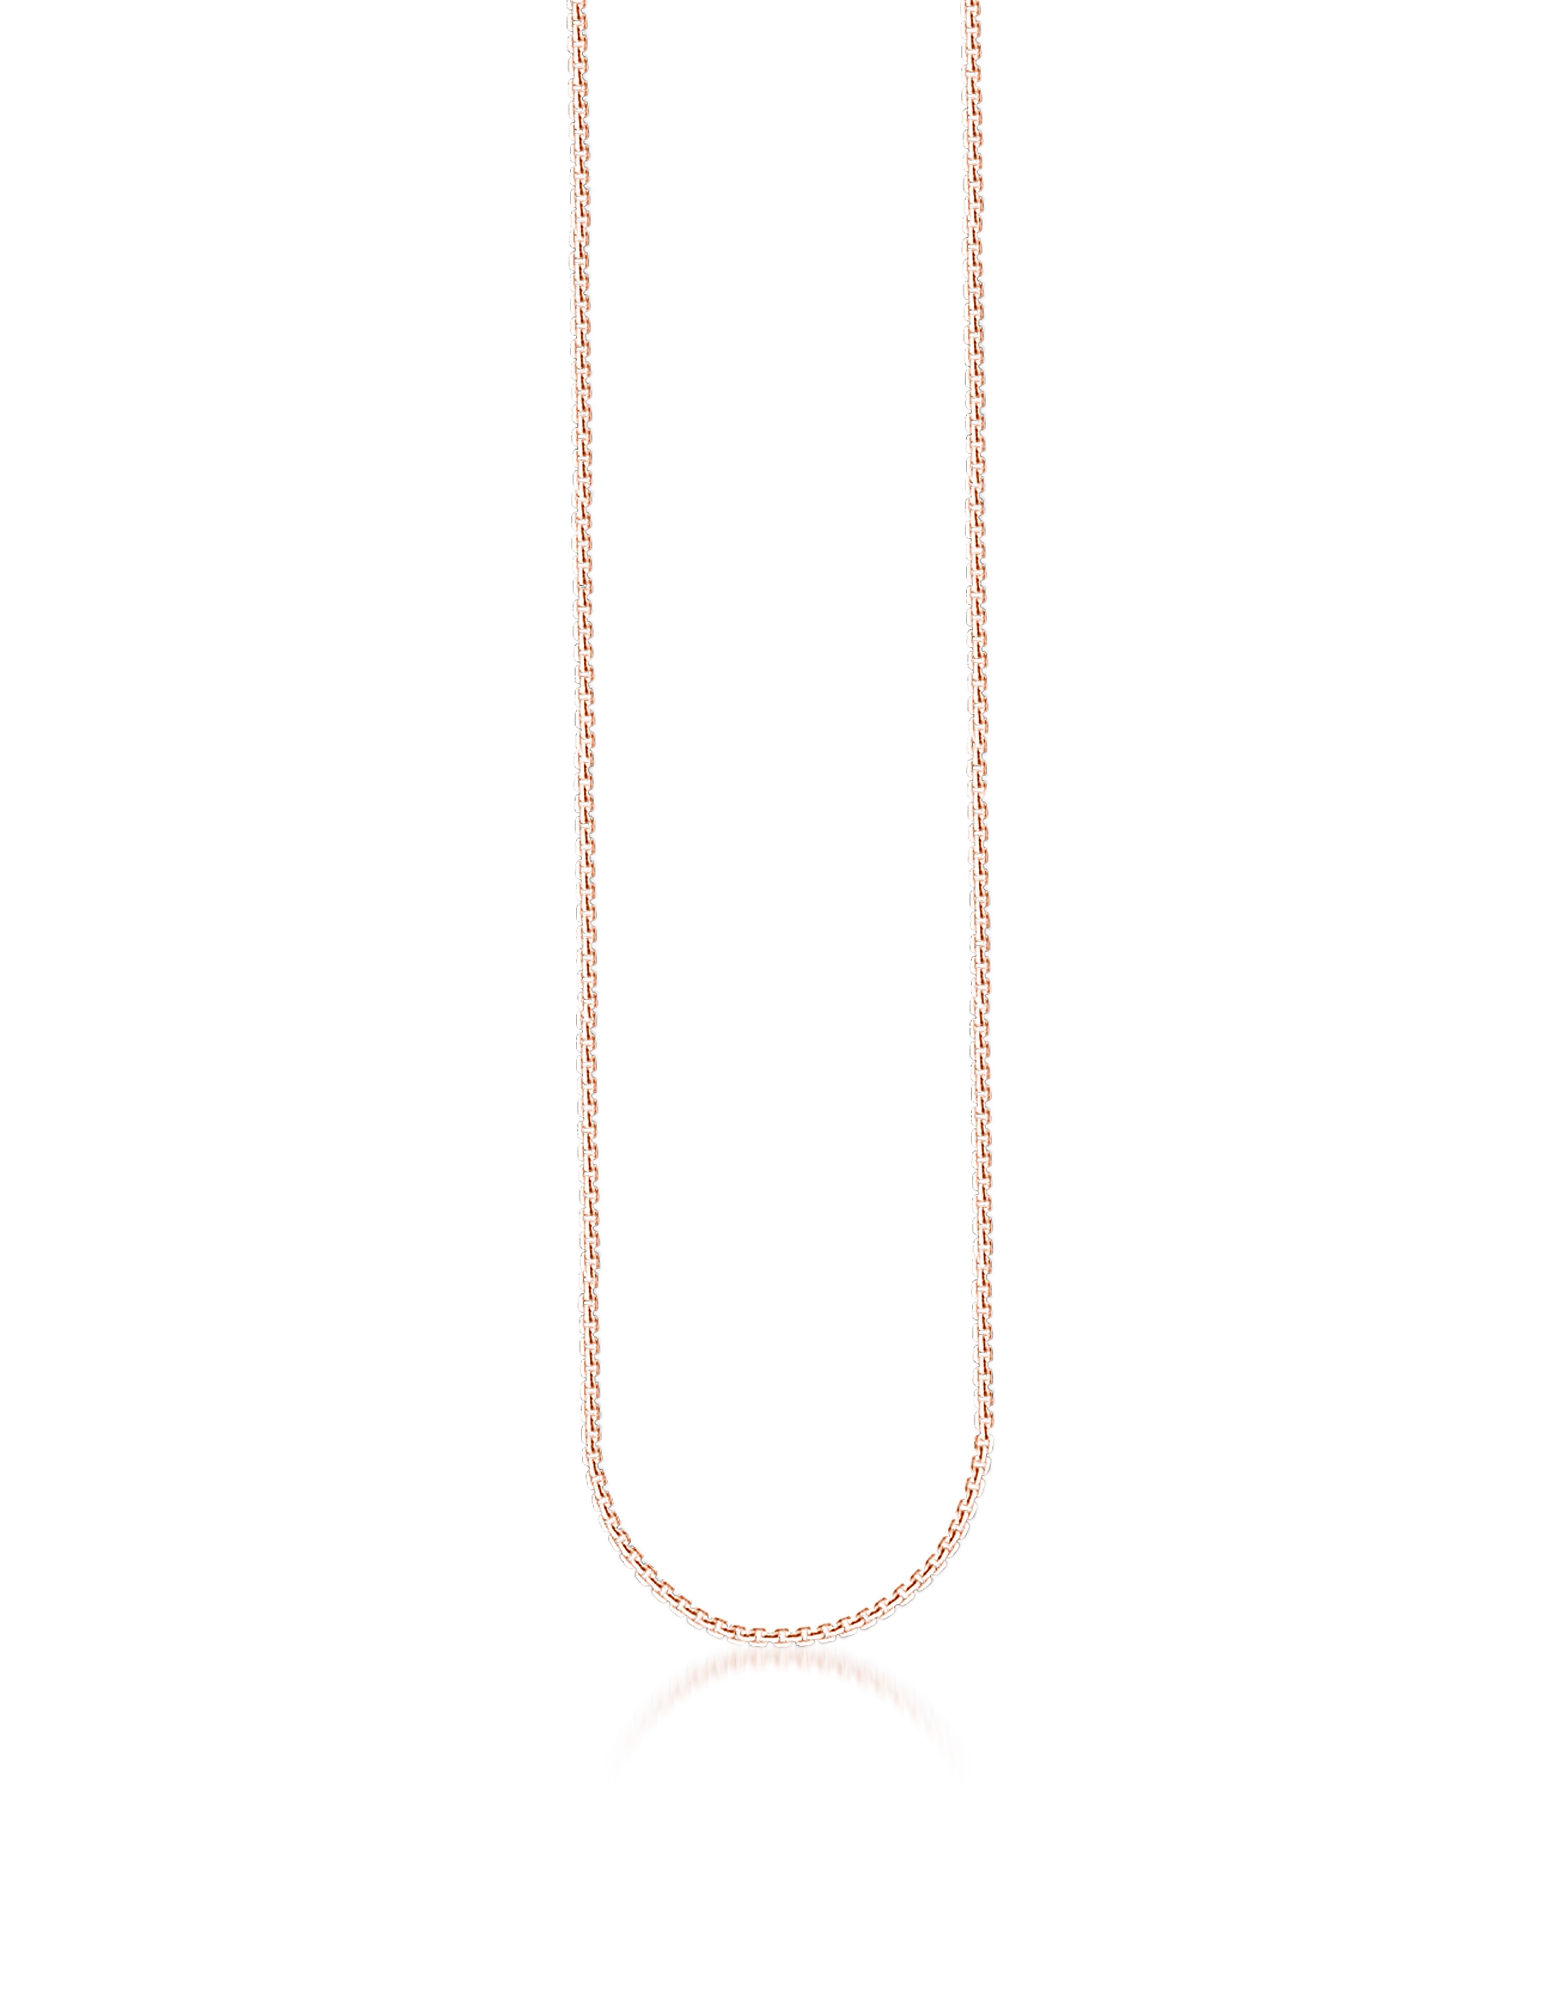 Rose Gold Plated Sterling Silver Venezia Chain Necklace